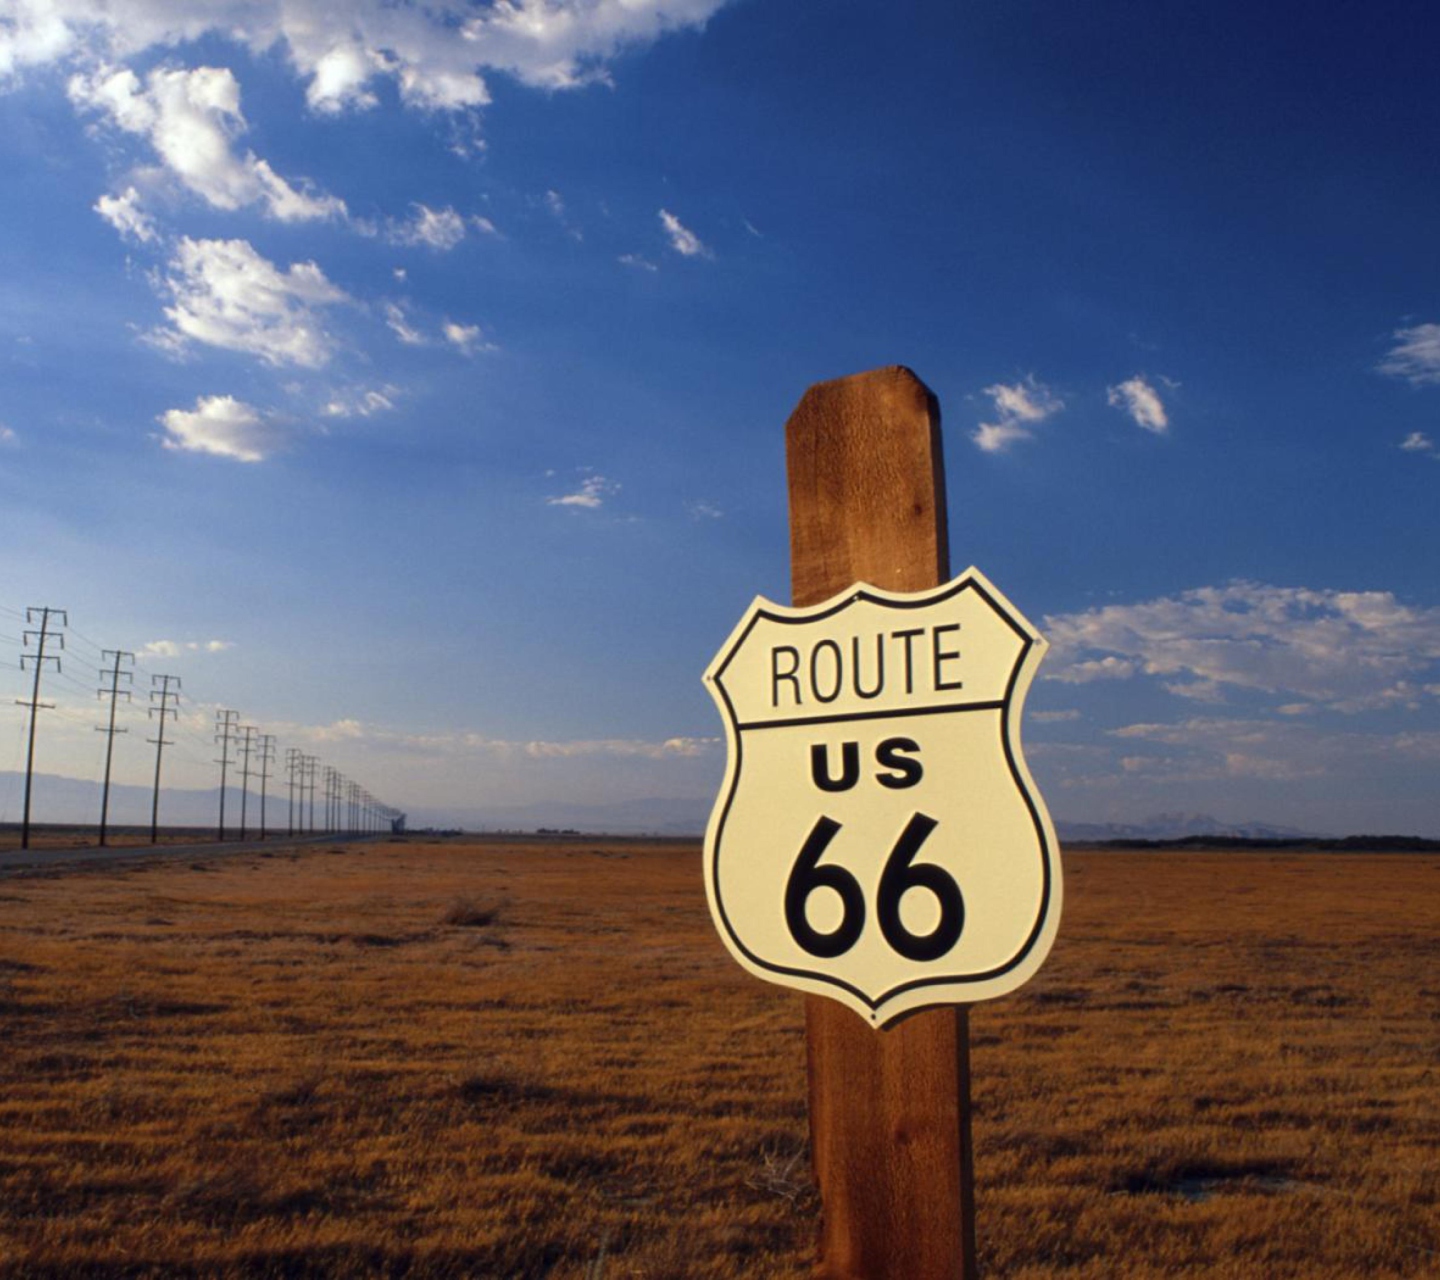 America's Most Famous Route 66 screenshot #1 1440x1280